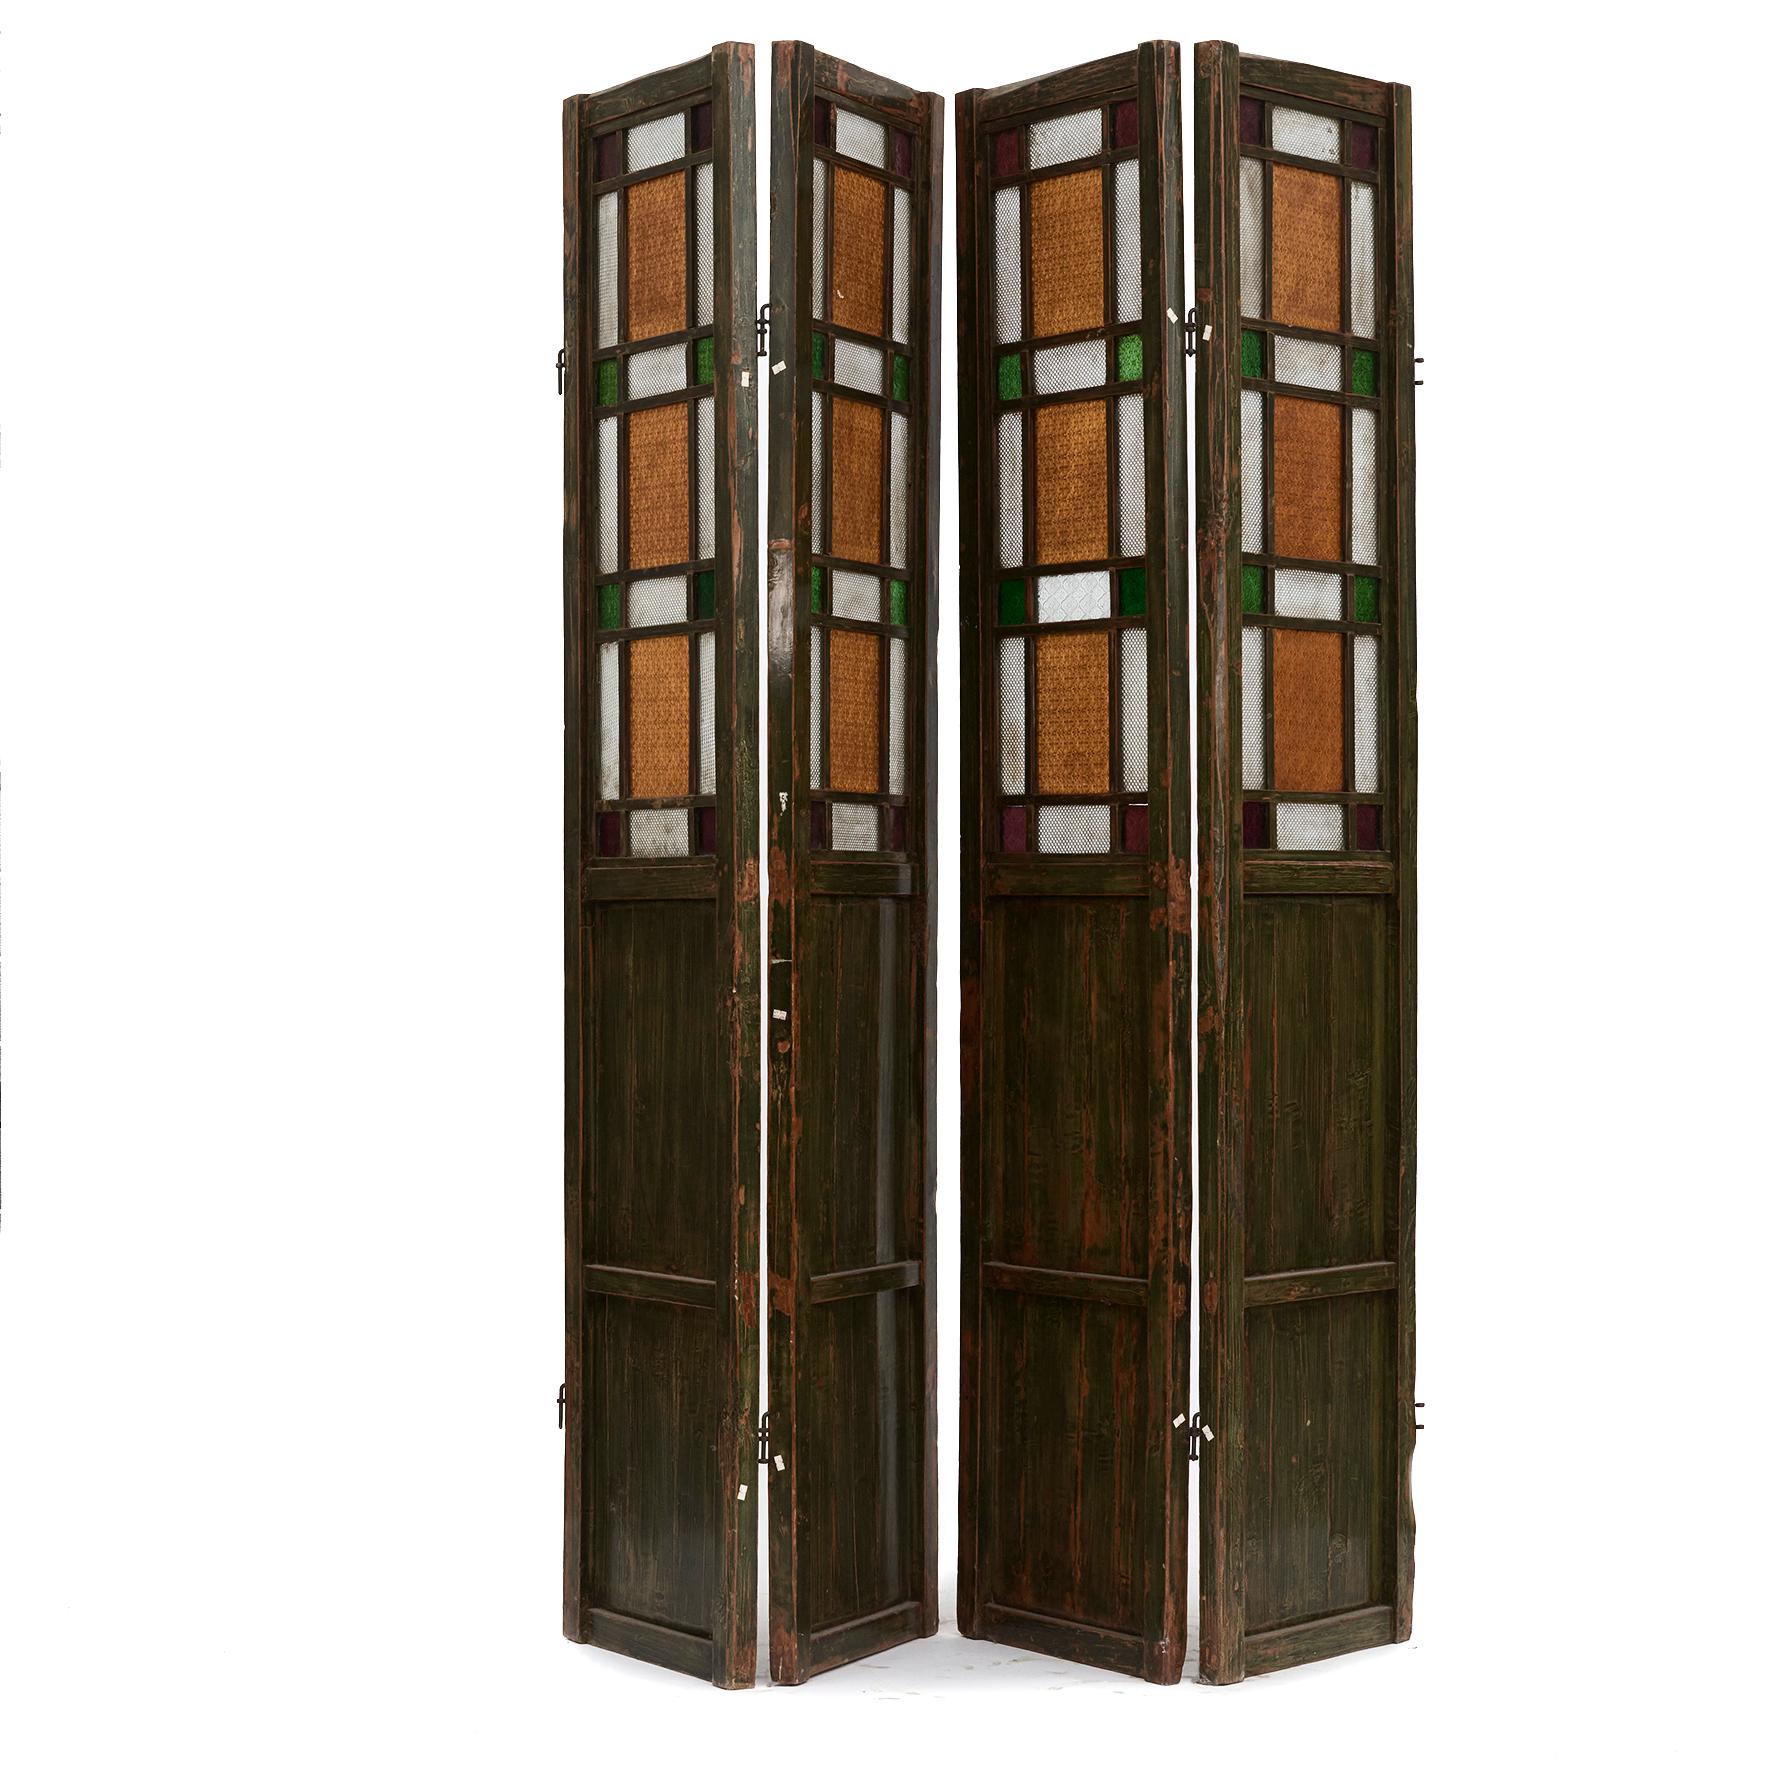 Art Nouveau four-fold screen In four sections.
Wood frame and panel with pictorial carving and original green lacquer with natural good patina.
Upper part with patterned pressed glass in polychrome, very decorative.
From house in Shanghai approx.